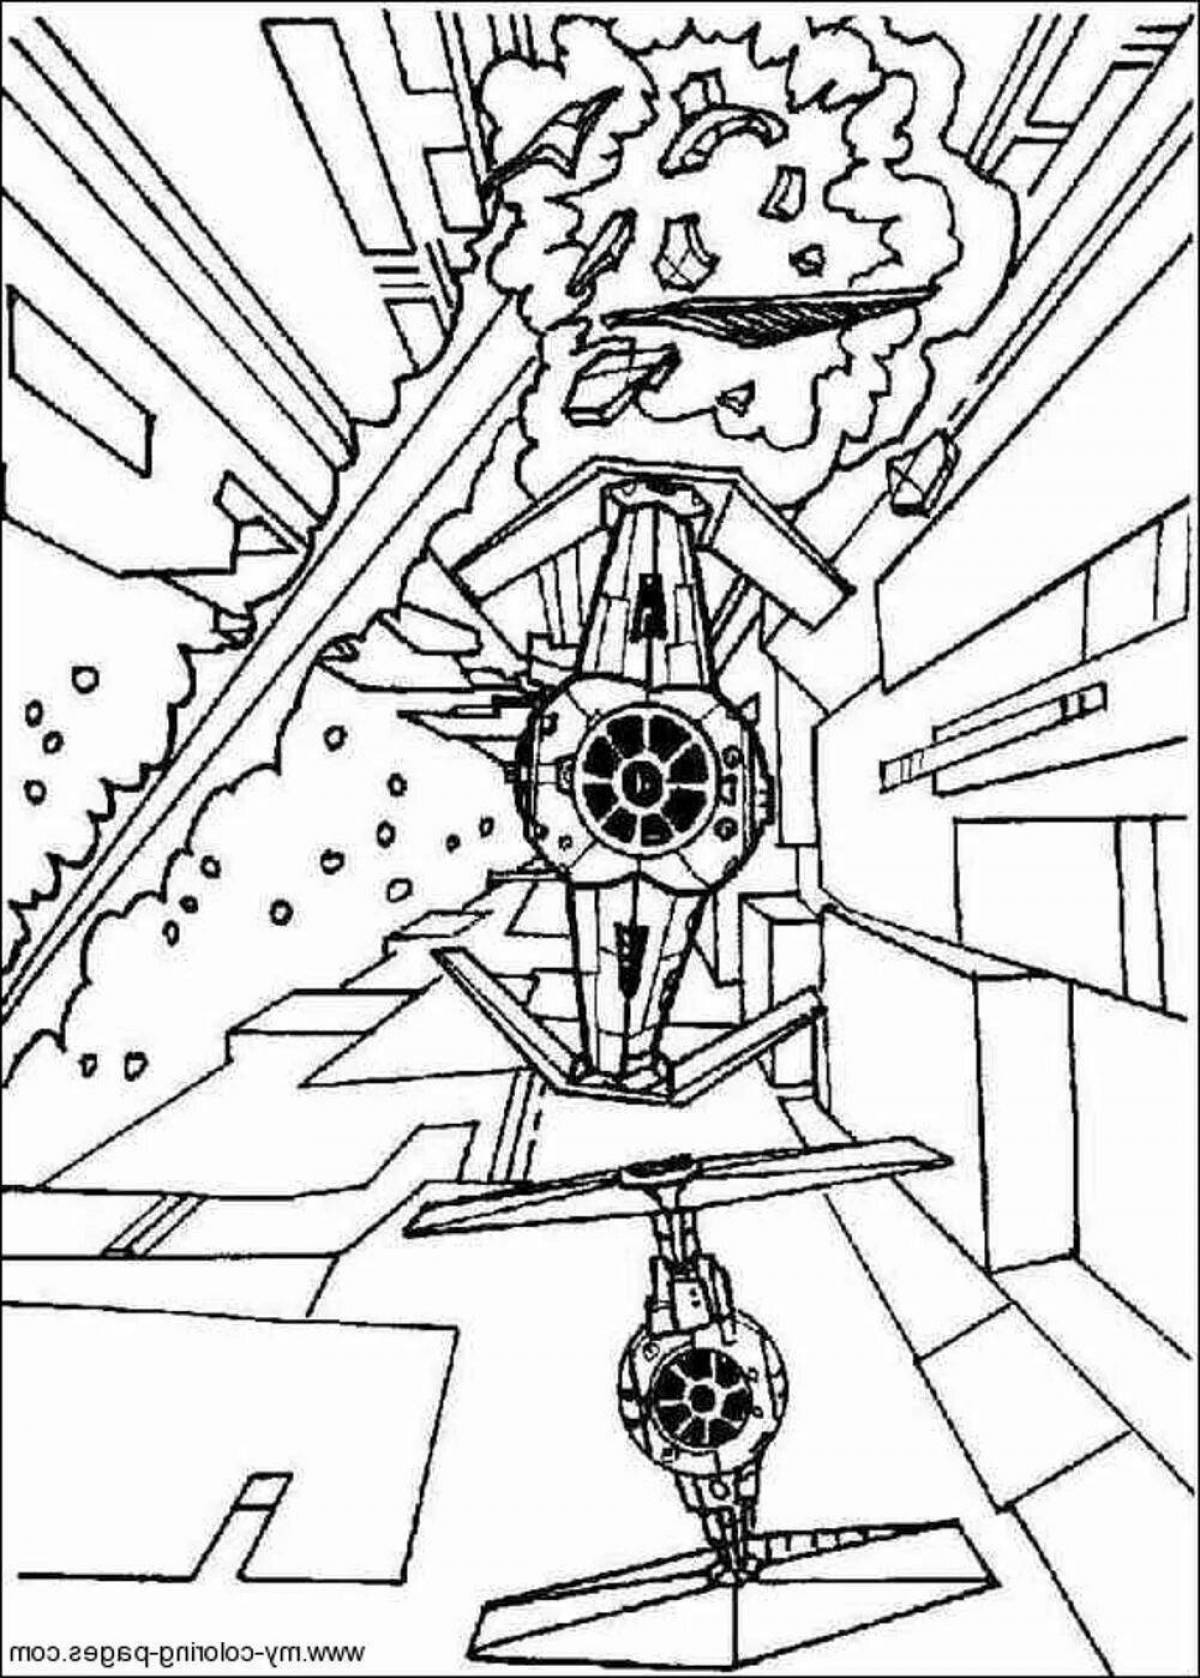 Star space wars coloring book